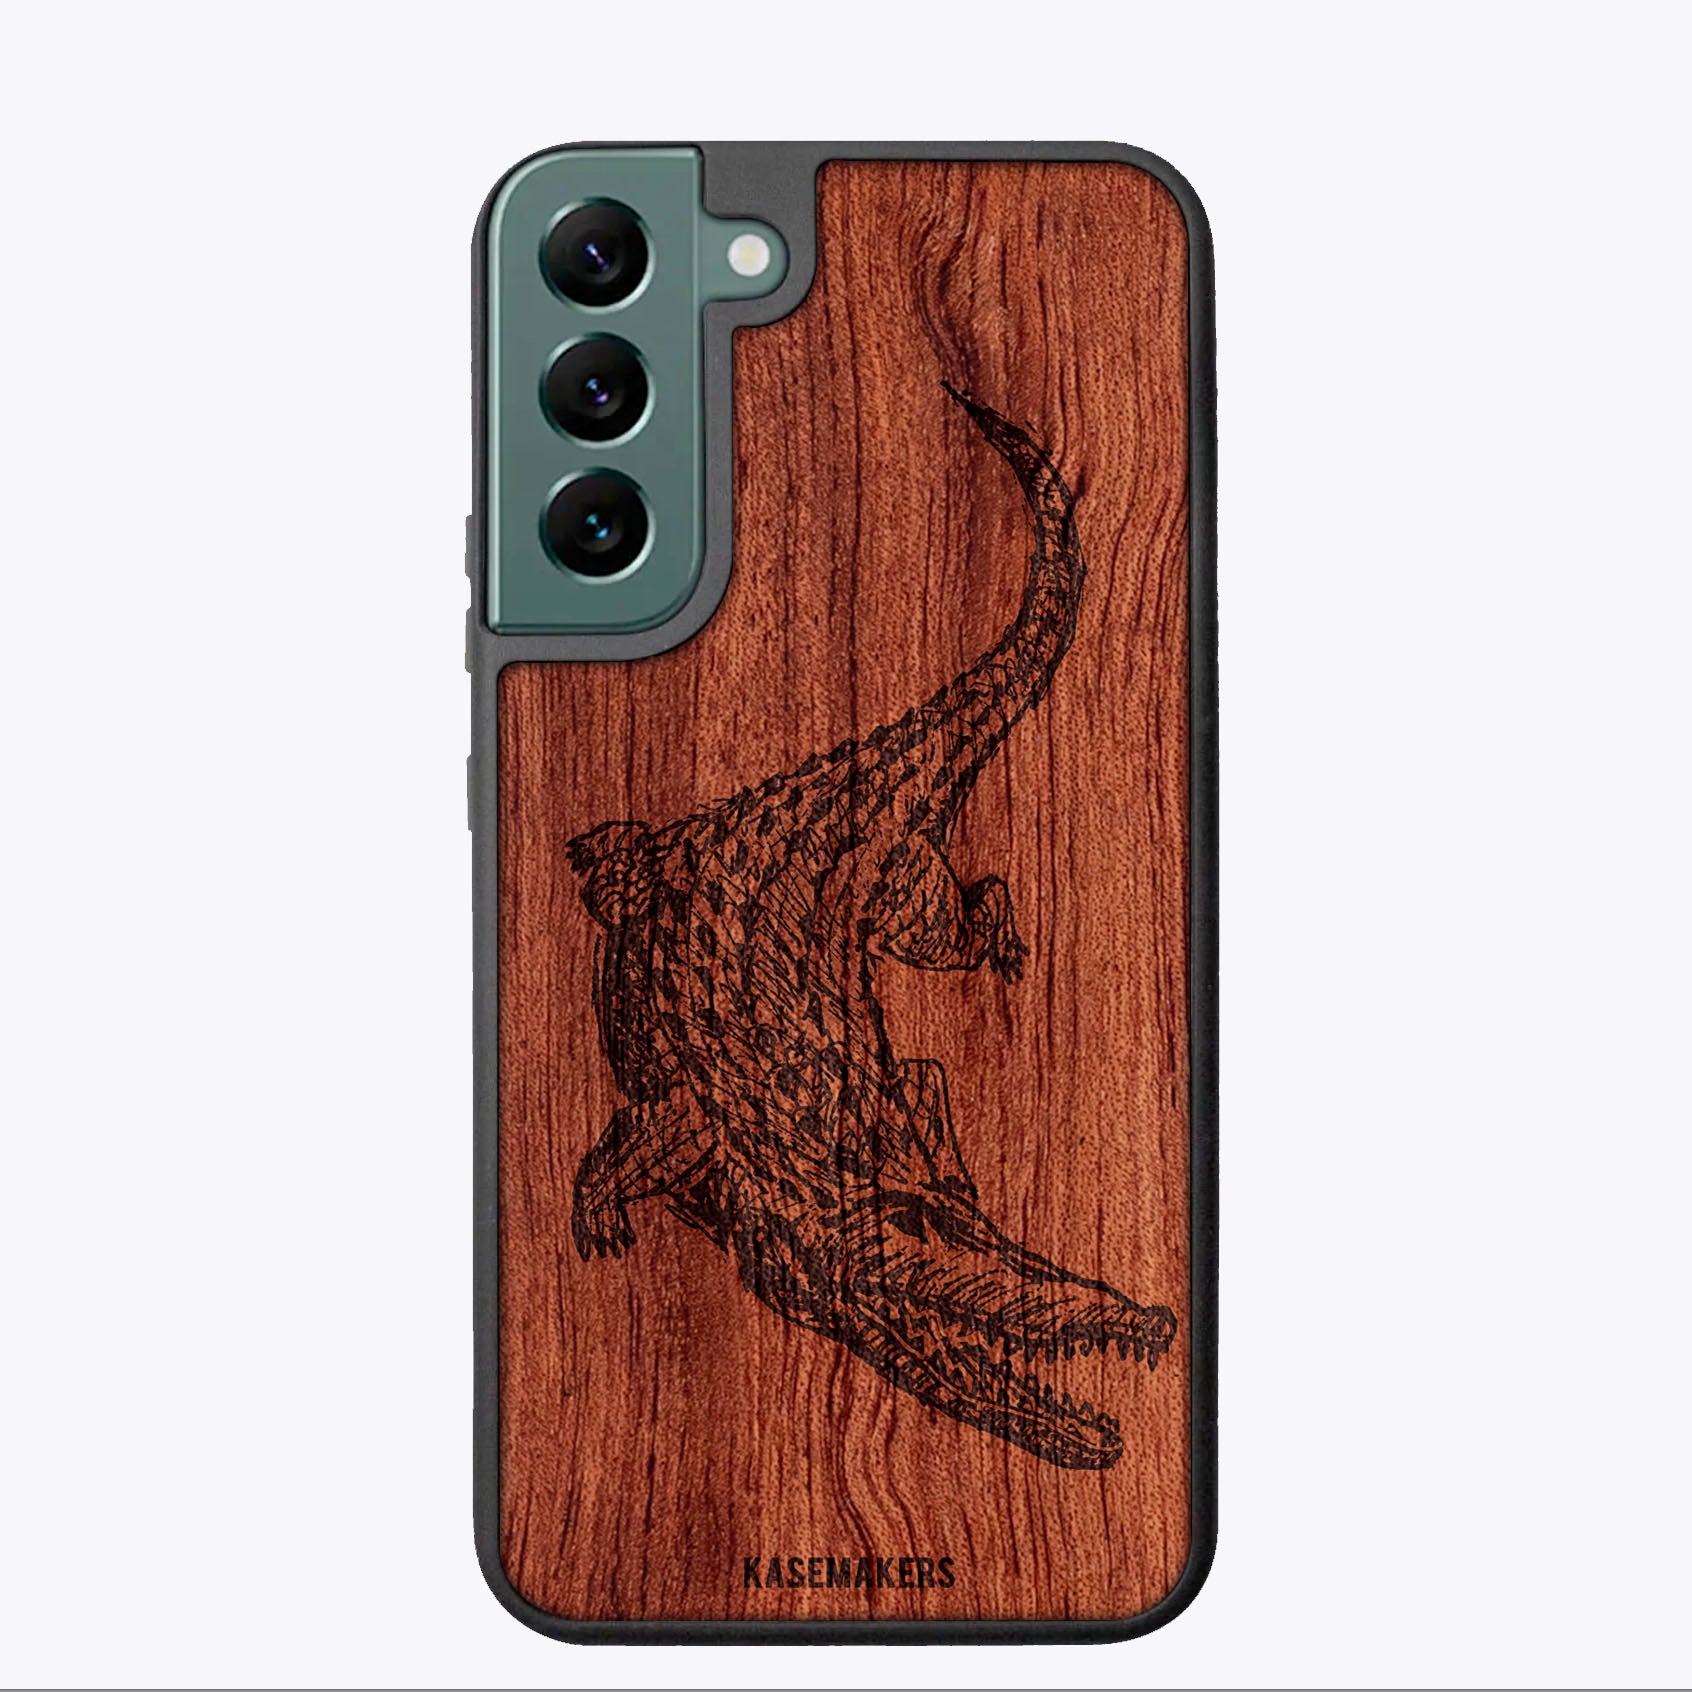 The Alligator for Samsung Galaxy S22 - Buy One Get One FREE!